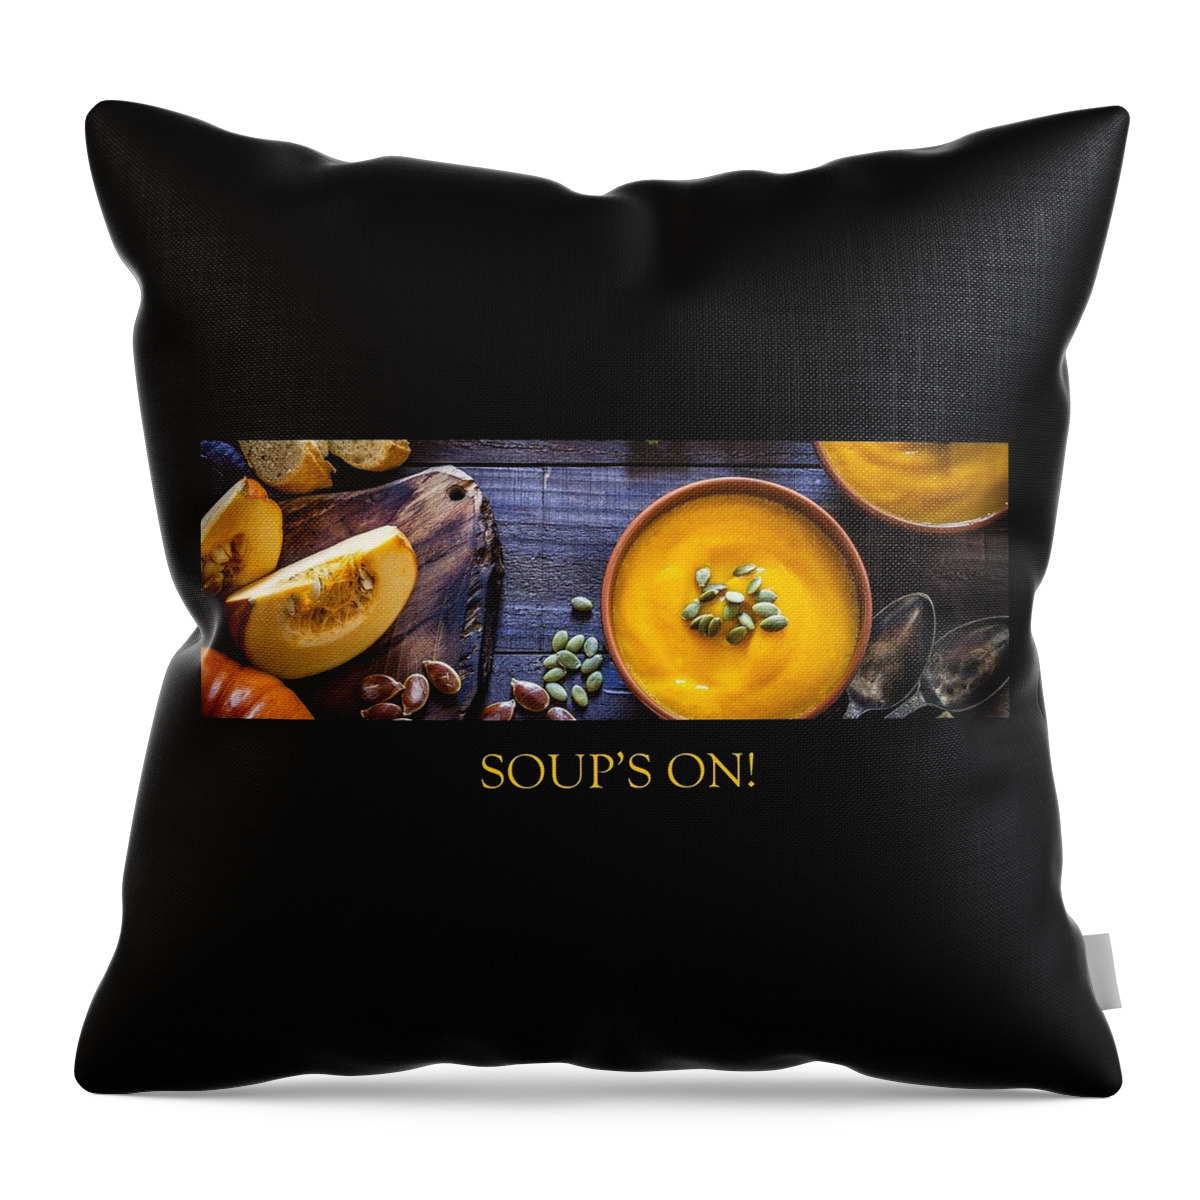 Soup Throw Pillow featuring the photograph Soup's On - Squash by Nancy Ayanna Wyatt